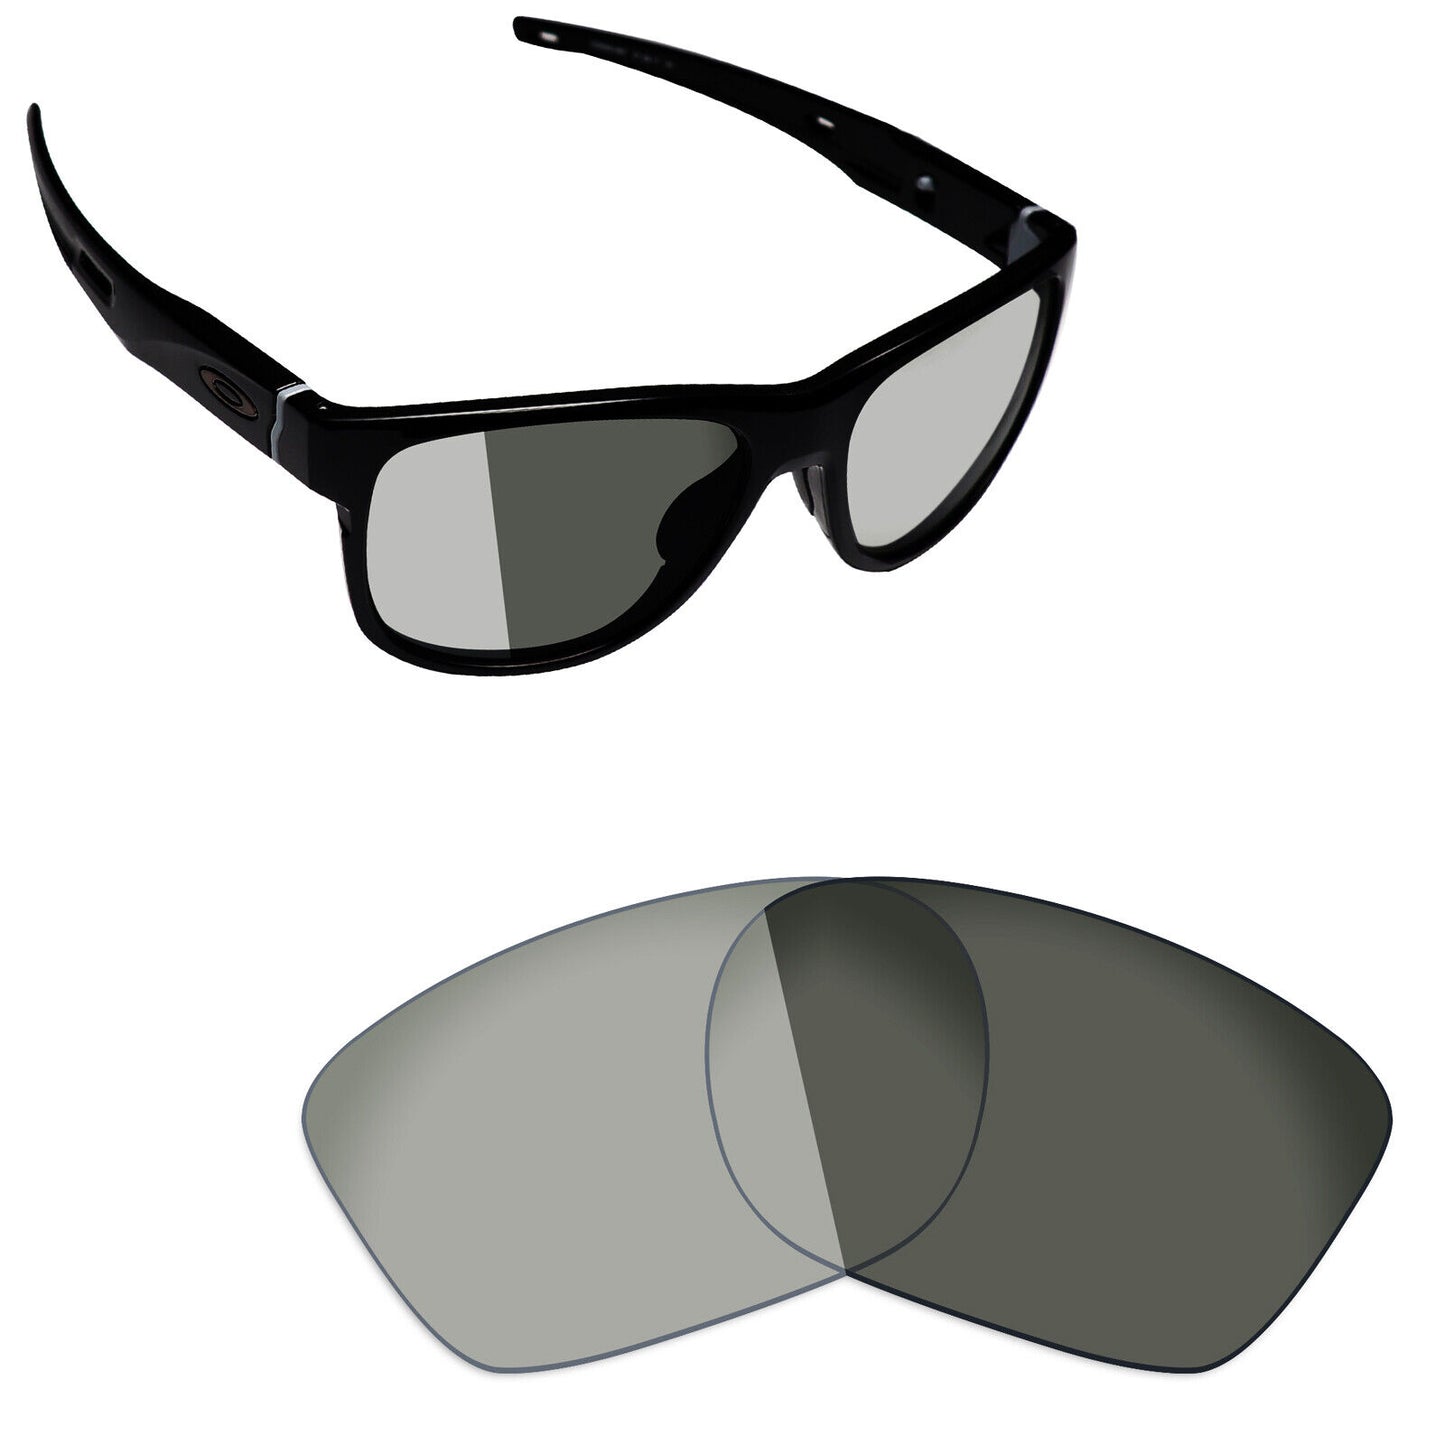 Hawkry Polarized Replacement Lens for-Oakley Crossrange Sunglass-Options